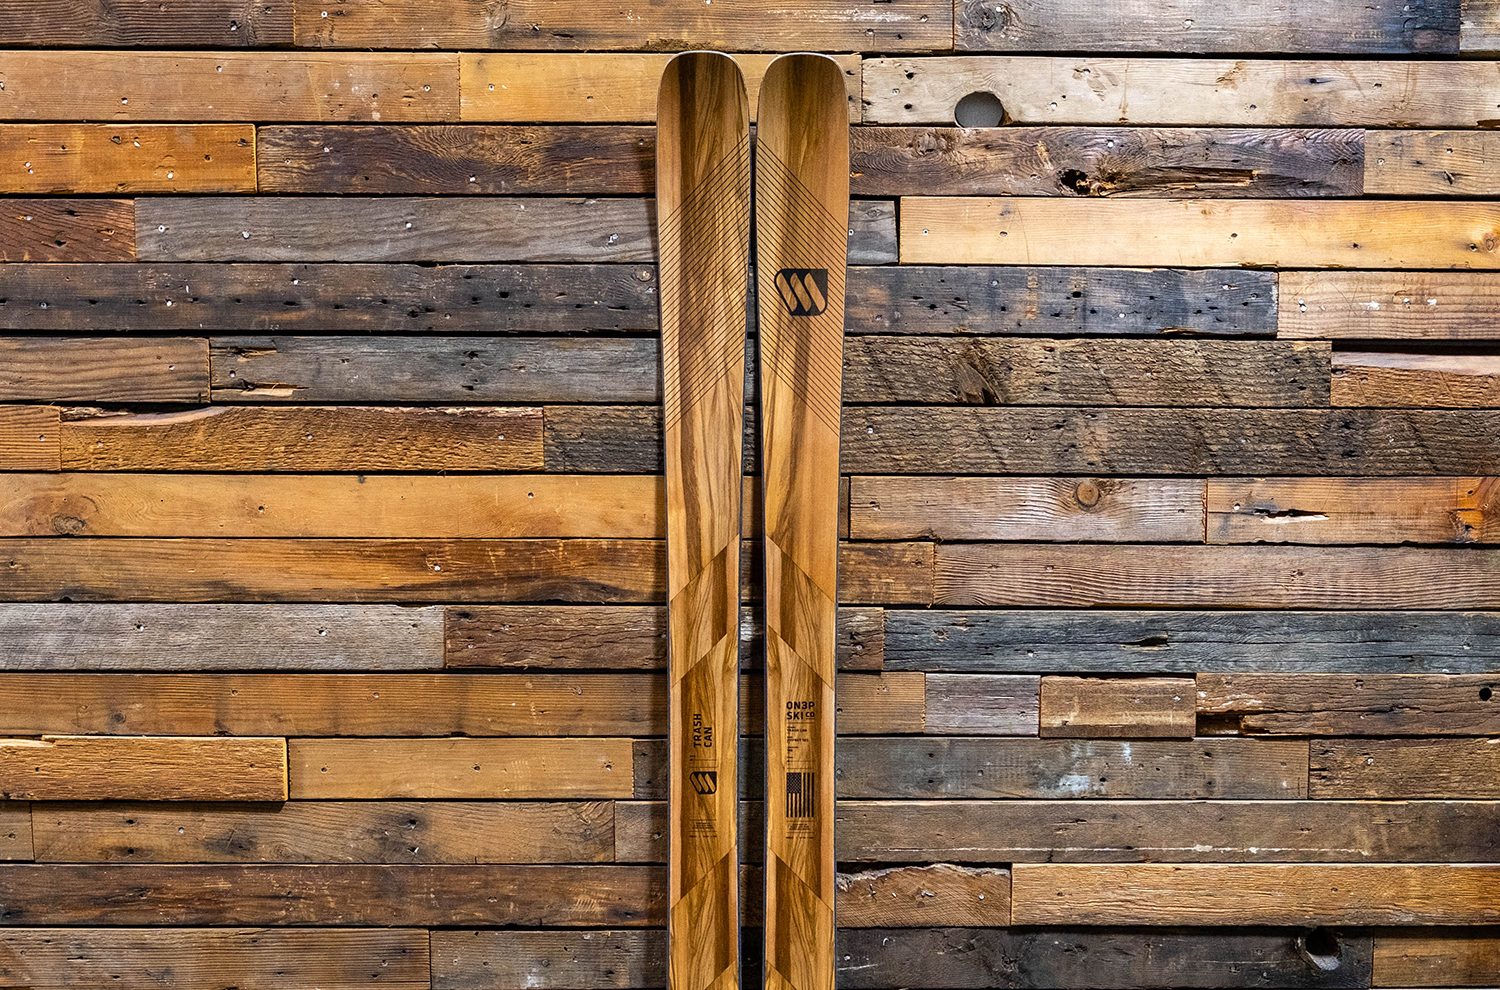 On GEAR:30, we talk with ON3P Skis founder, Scott Andrus, about what’s been going on at ON3P, and we walk through the brand’s 22/23 lineup of skis.